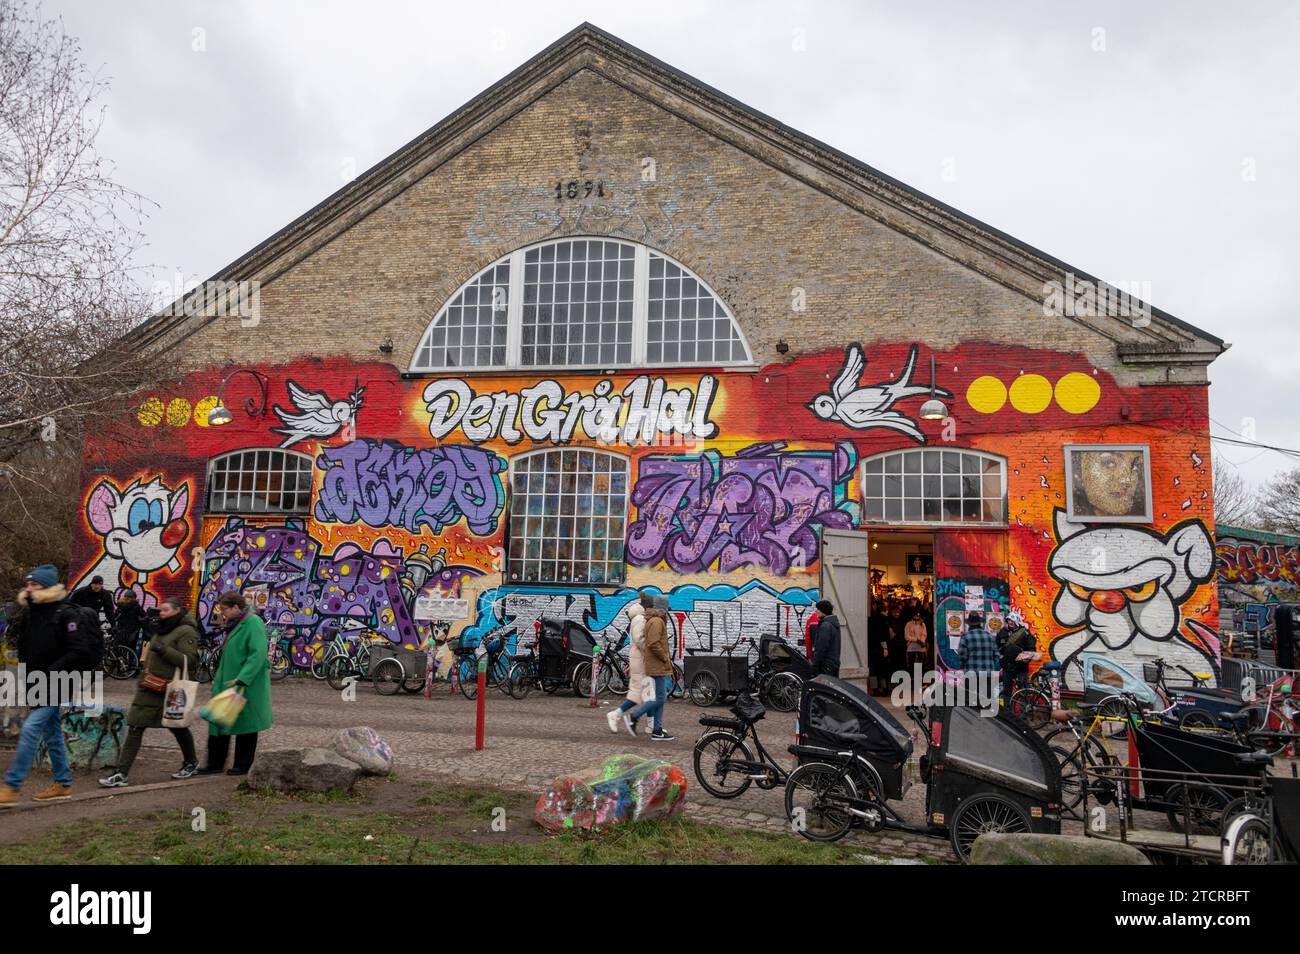 The undercover market at Christiania, a former army barracks, and Hippy colony is a commune in the neighbourhood of Christainshavn of Copenhagen in De Stock Photo